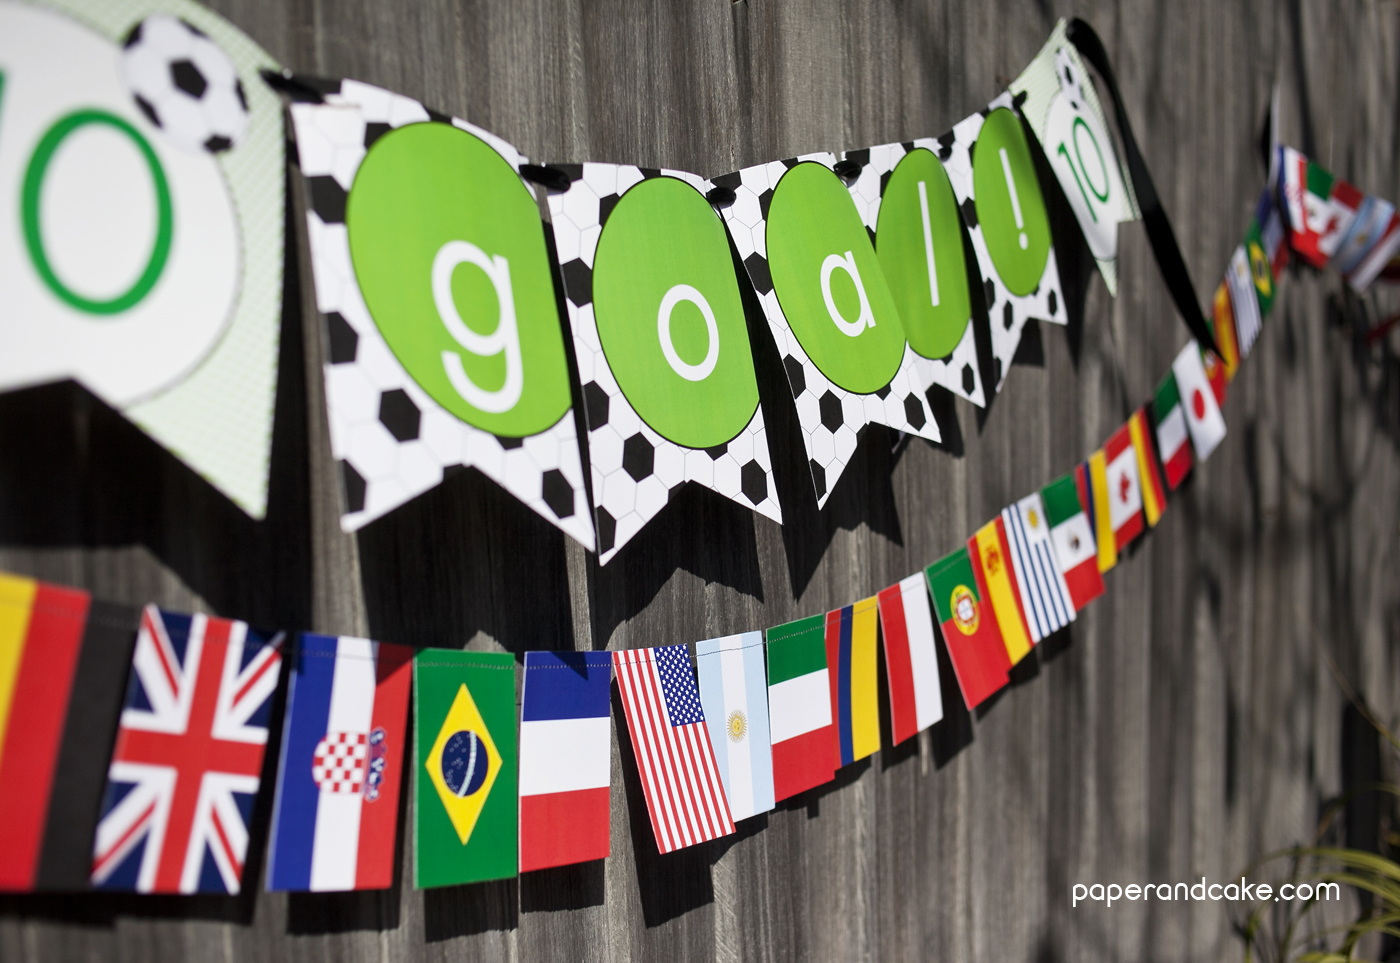 Soccer Printable Birthday Party - Paper and Cake Paper and Cake